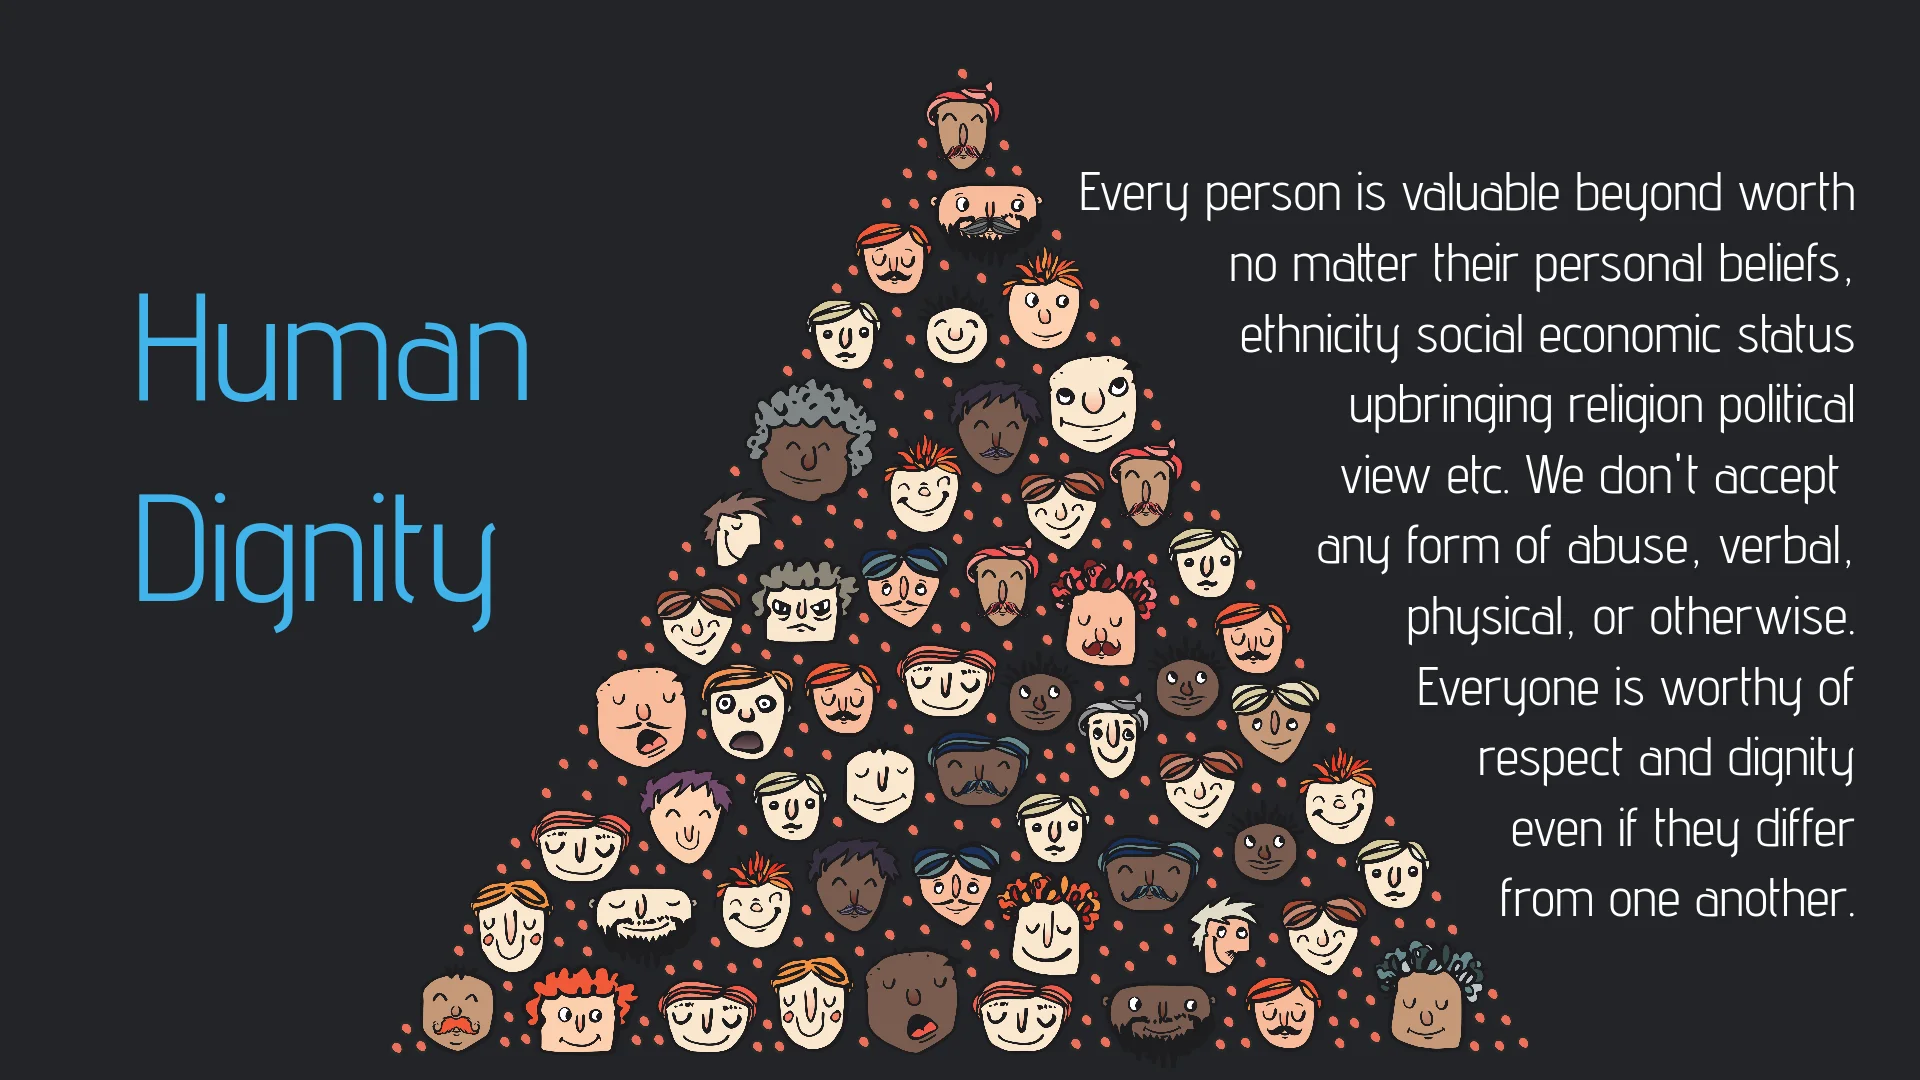 Image 3 with a paragraph about our core value: Human Dignity Every person is valuable beyond worth no matter their personal beliefs, ethnicity social economic status upbringing religion political view